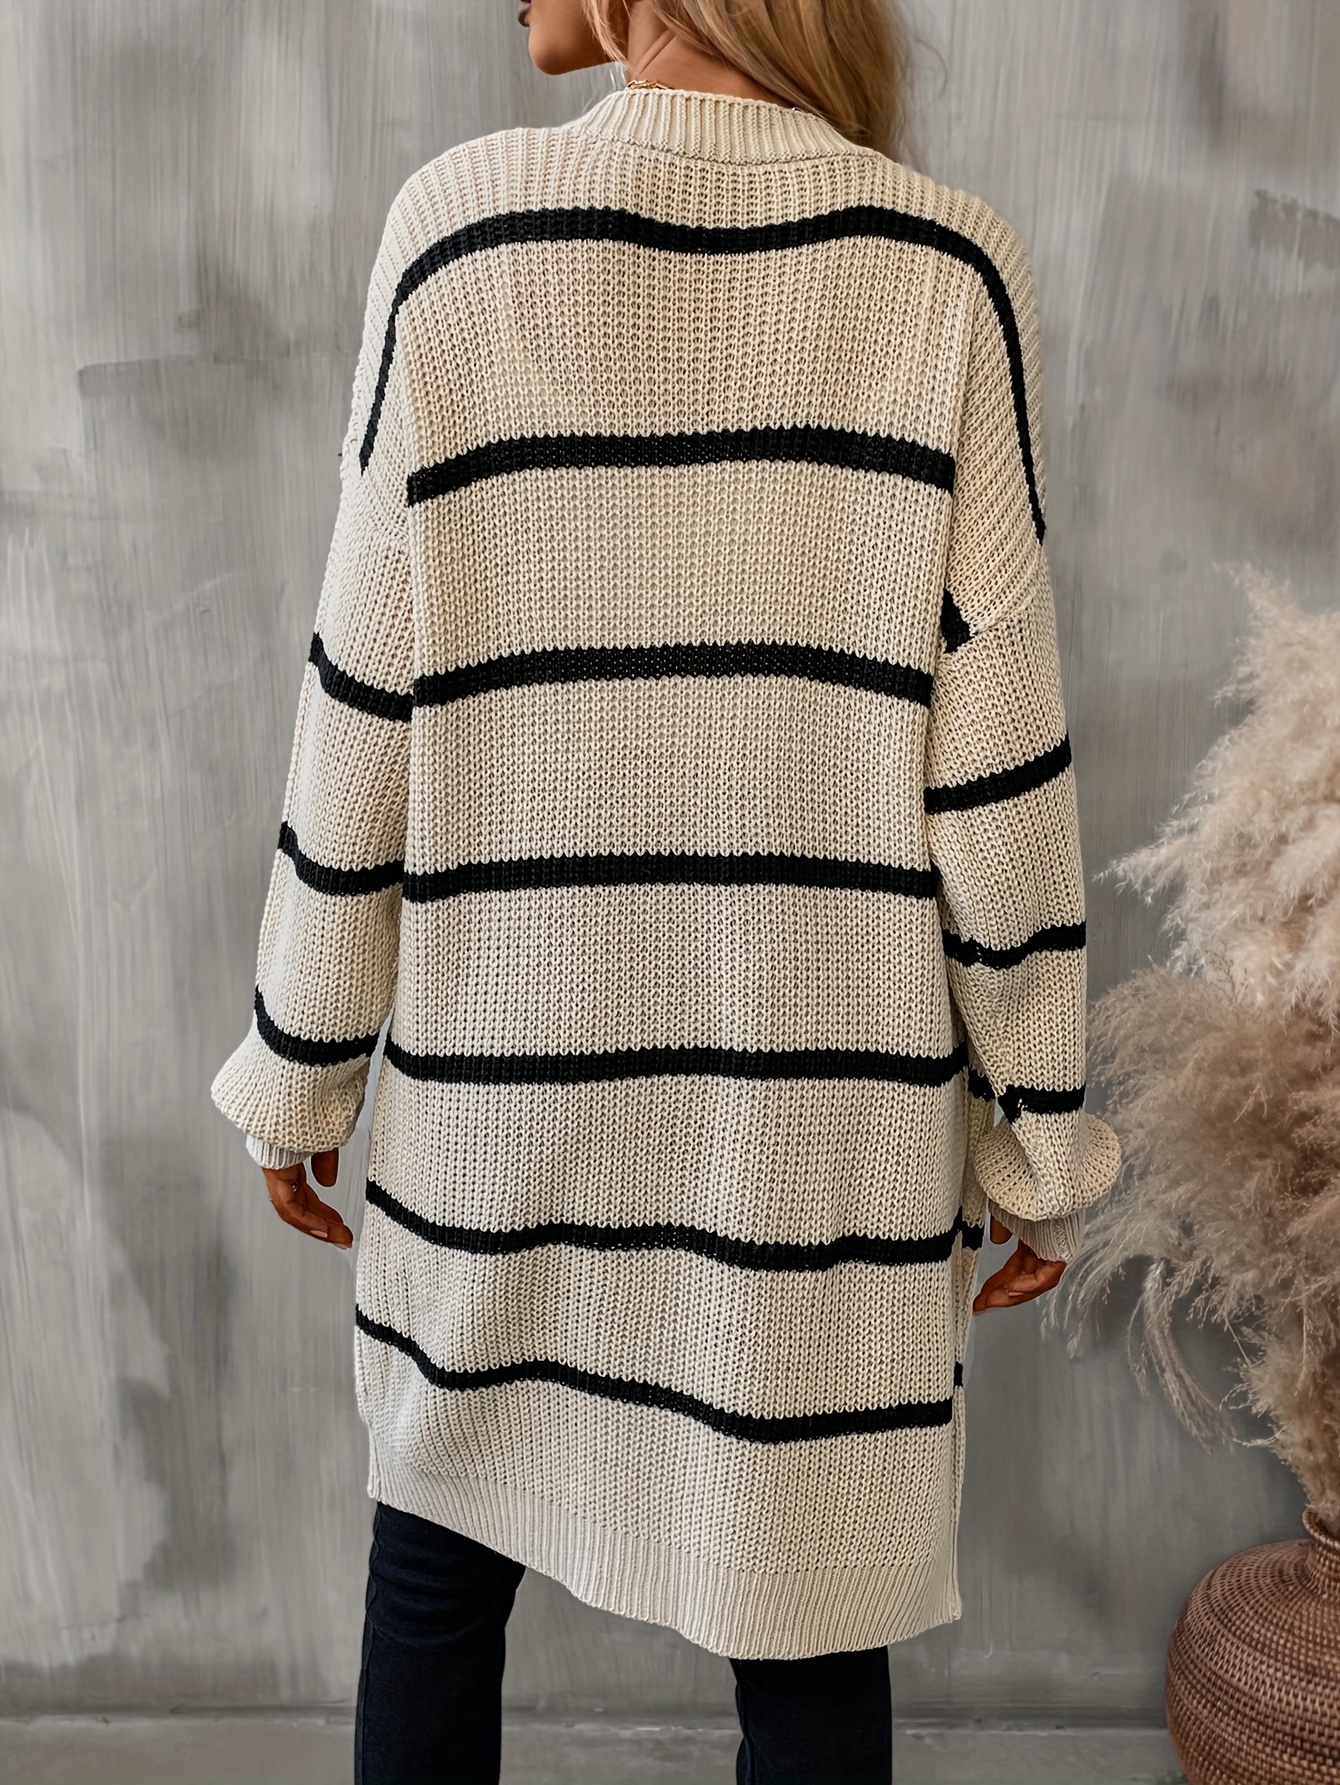 2023 Autumn and Winter Fashion Casual Black and White Striped Loose  Cardigan Sweater Women